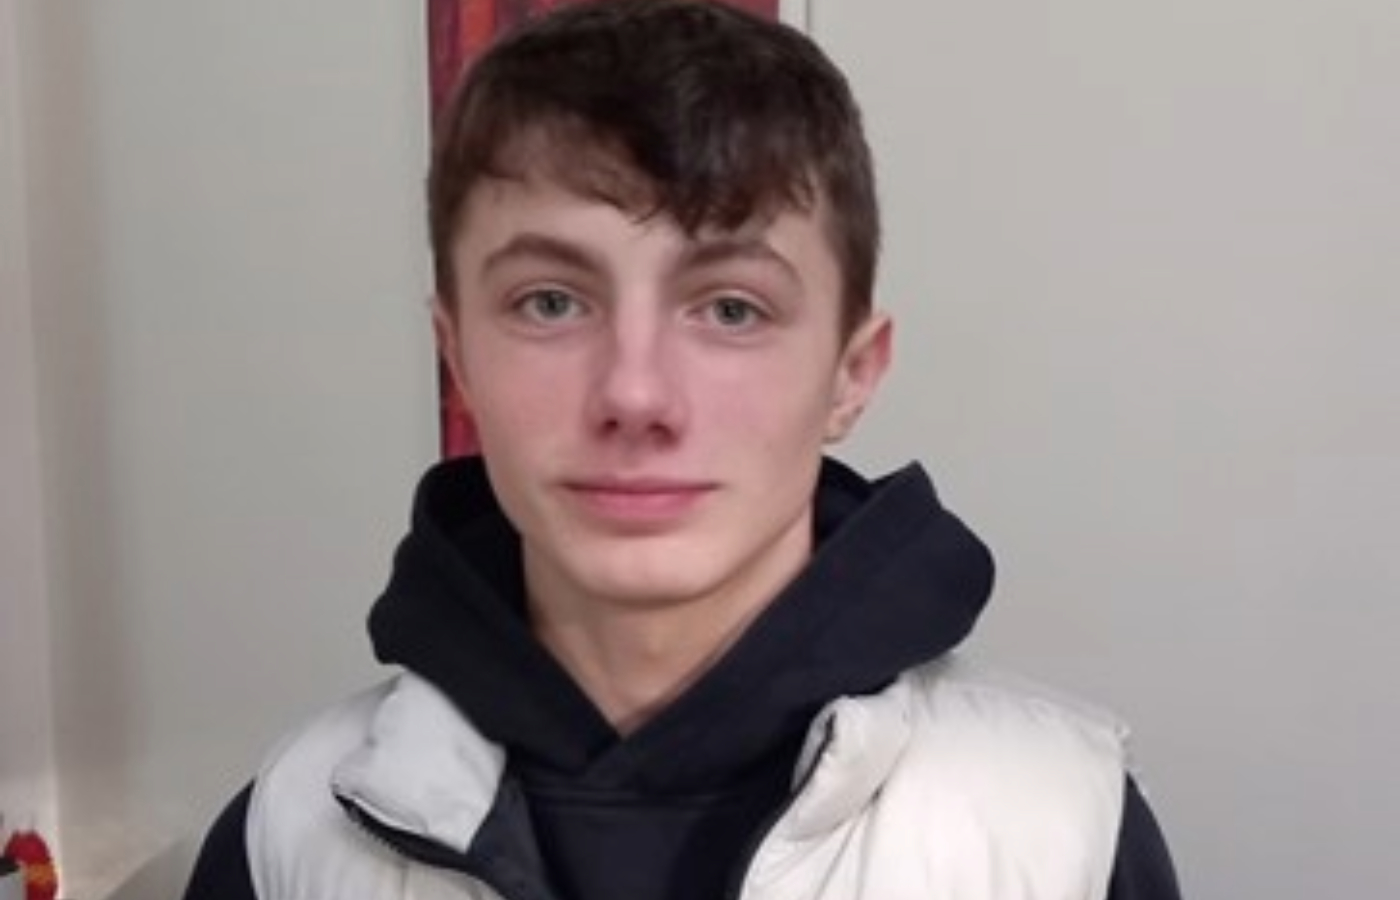 Marcus Beck, aged 17, from Elgin died in the e-bike crash